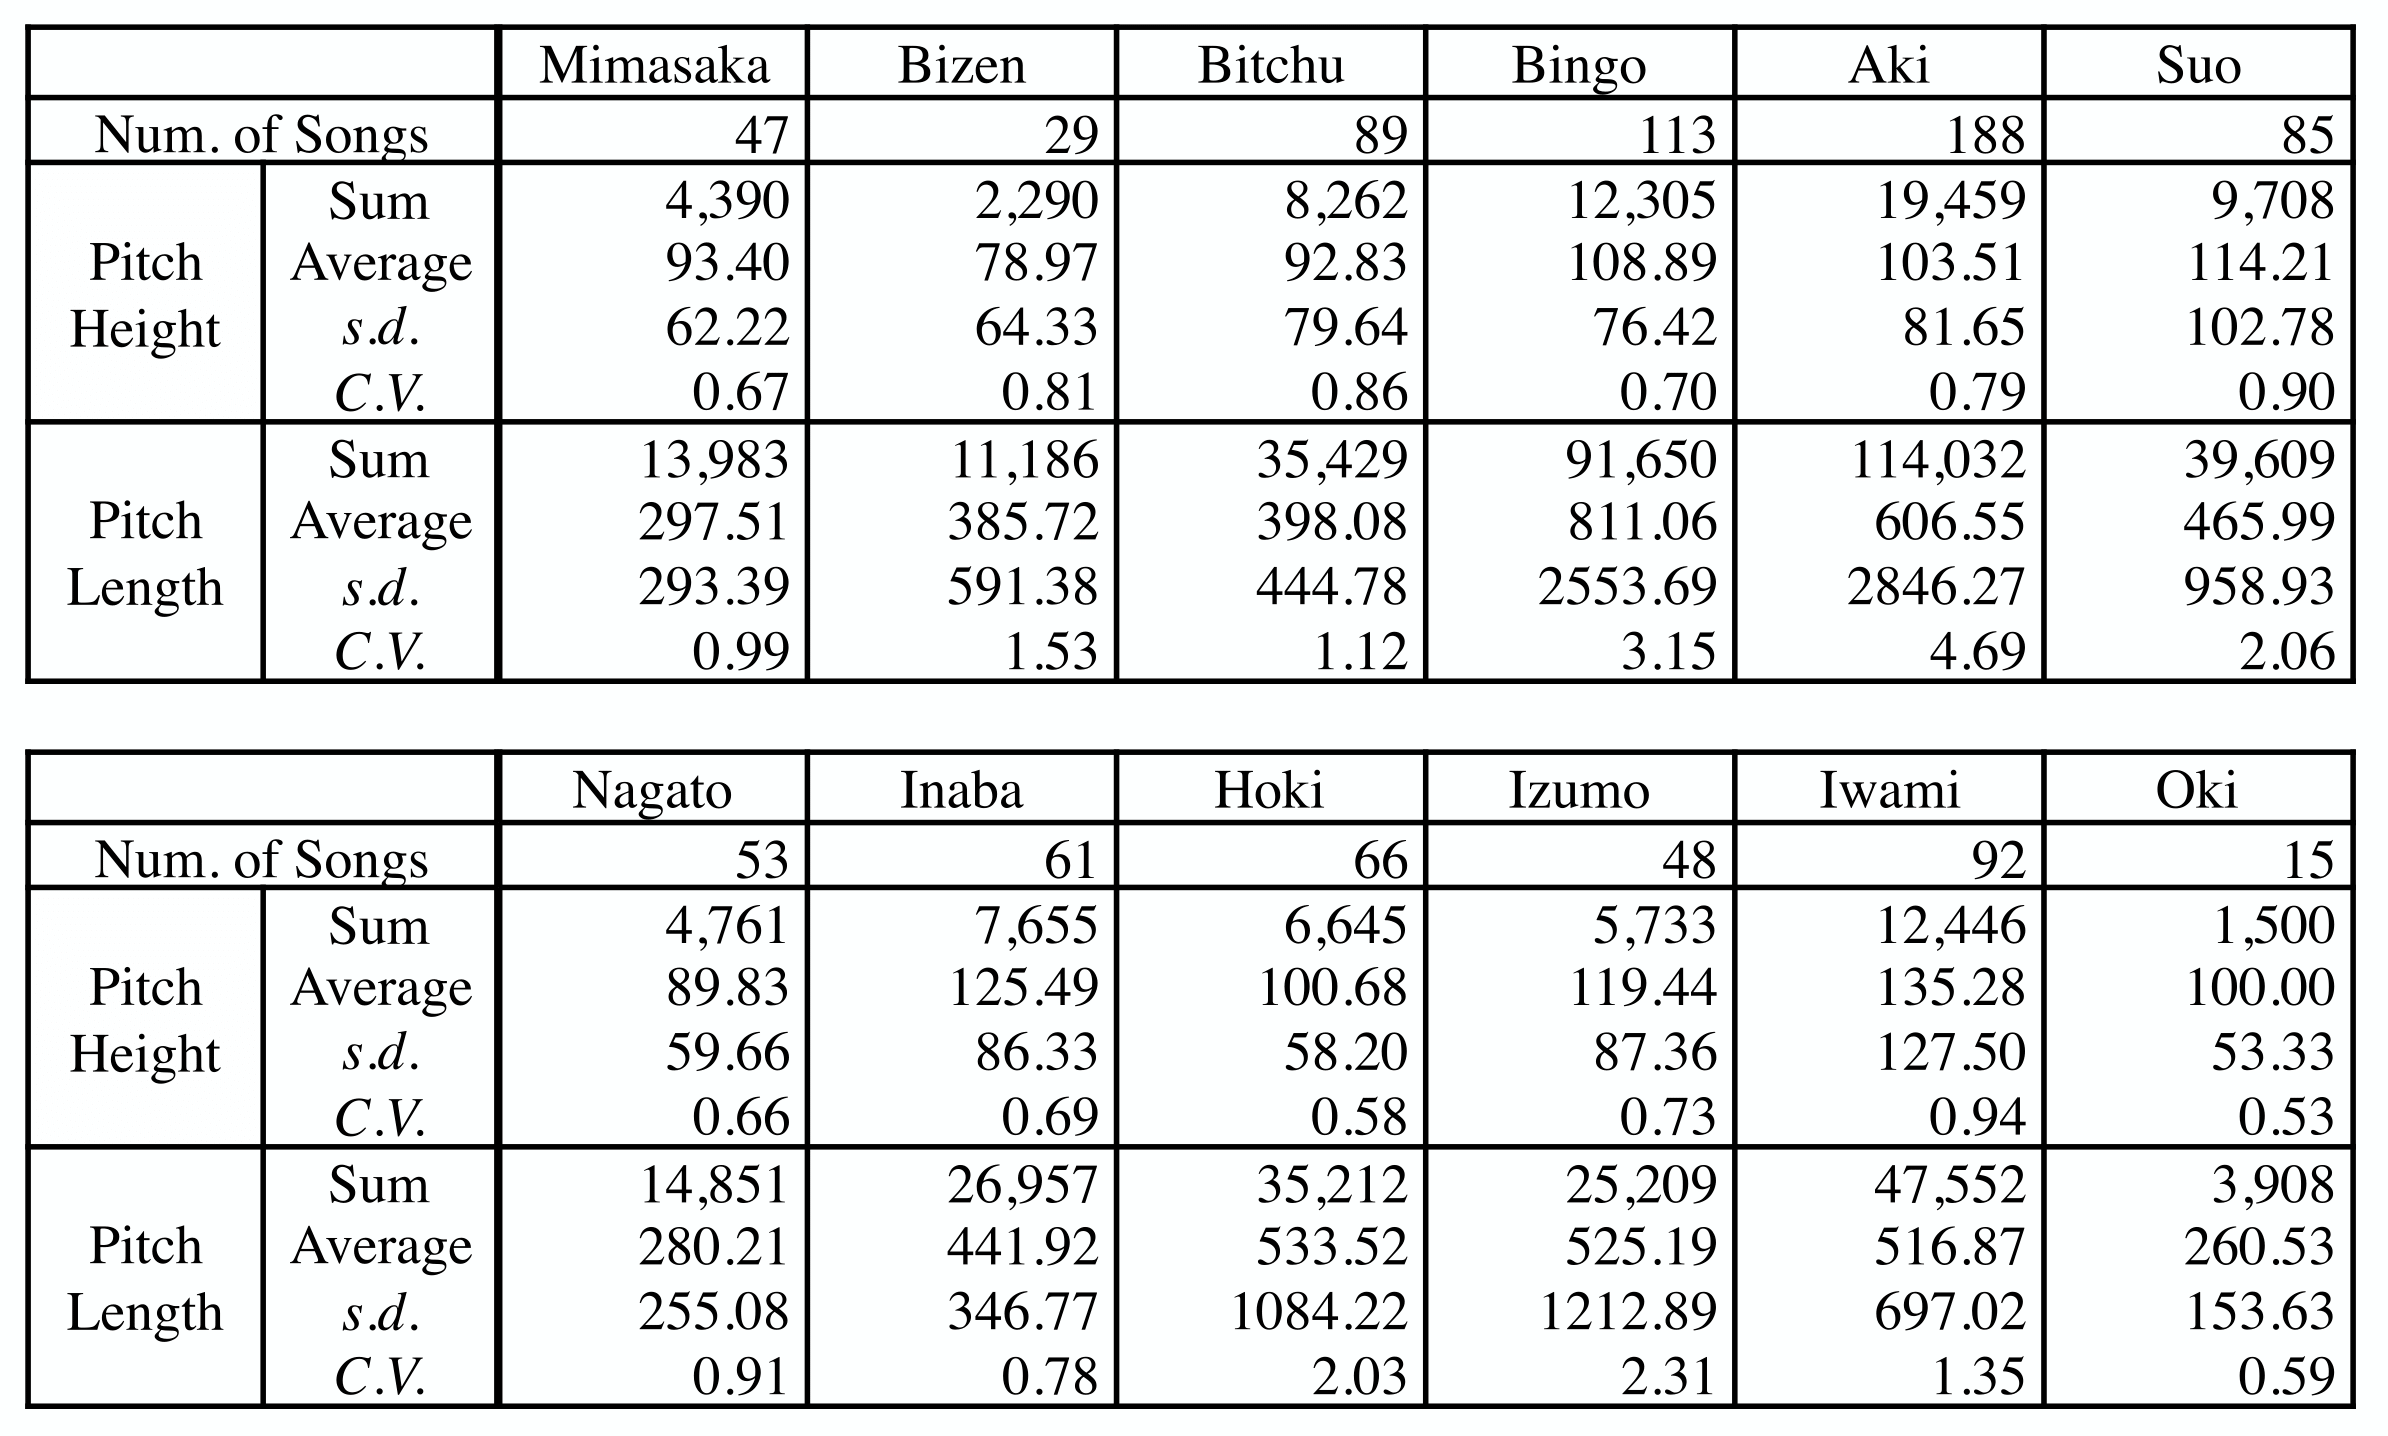 Table 2: Basic Statistics for Number of Songs for Each Province